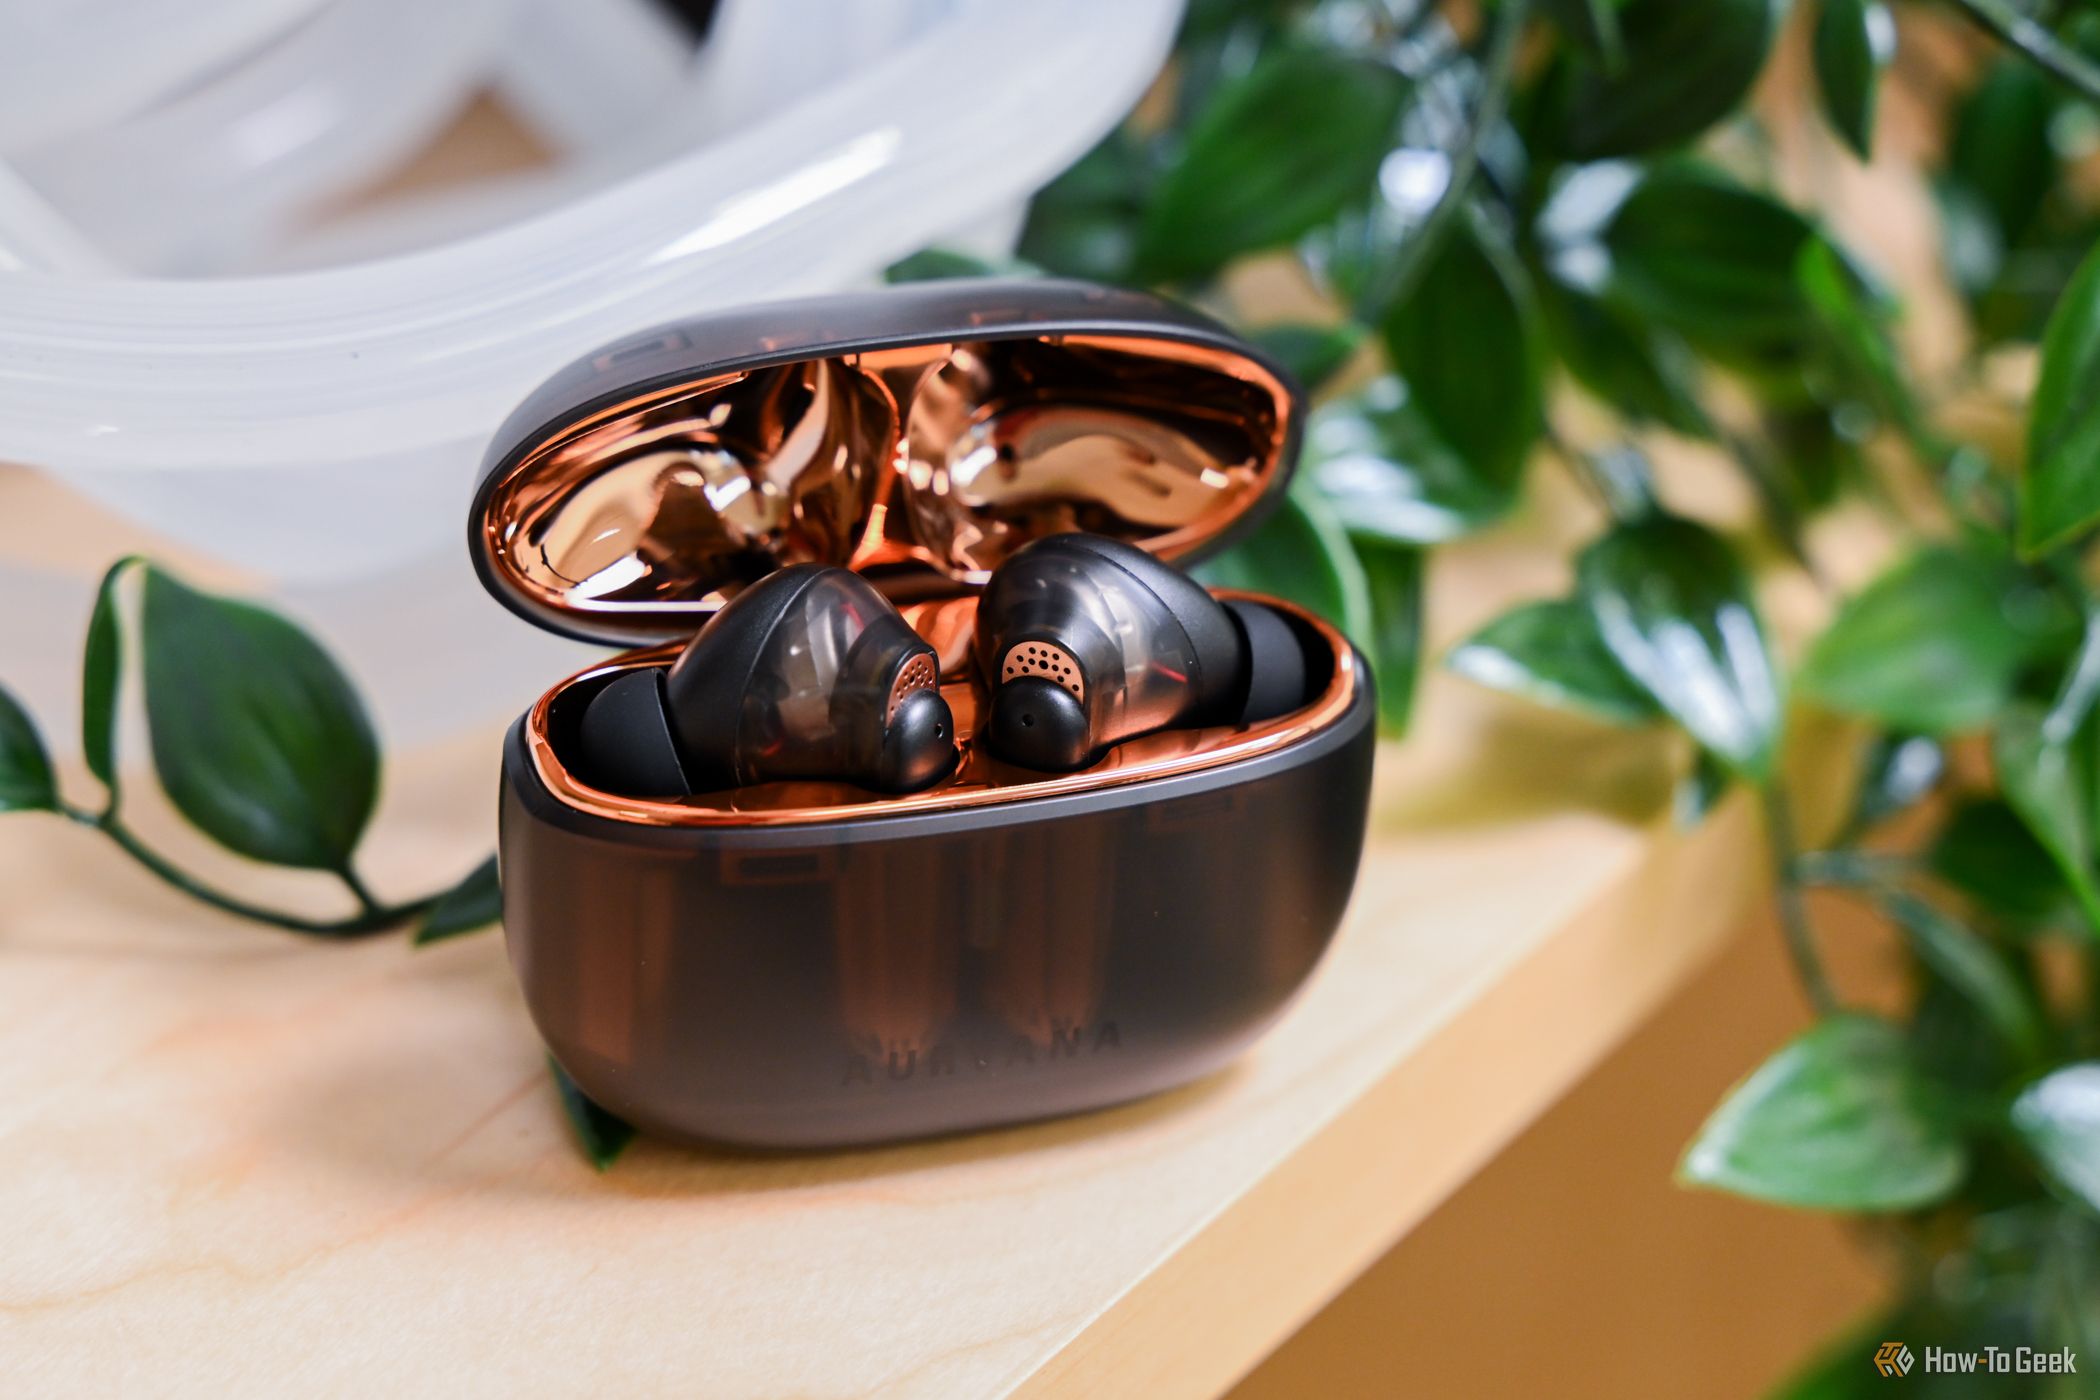 The Creative Aurvana Ace 2 earbuds in their open case